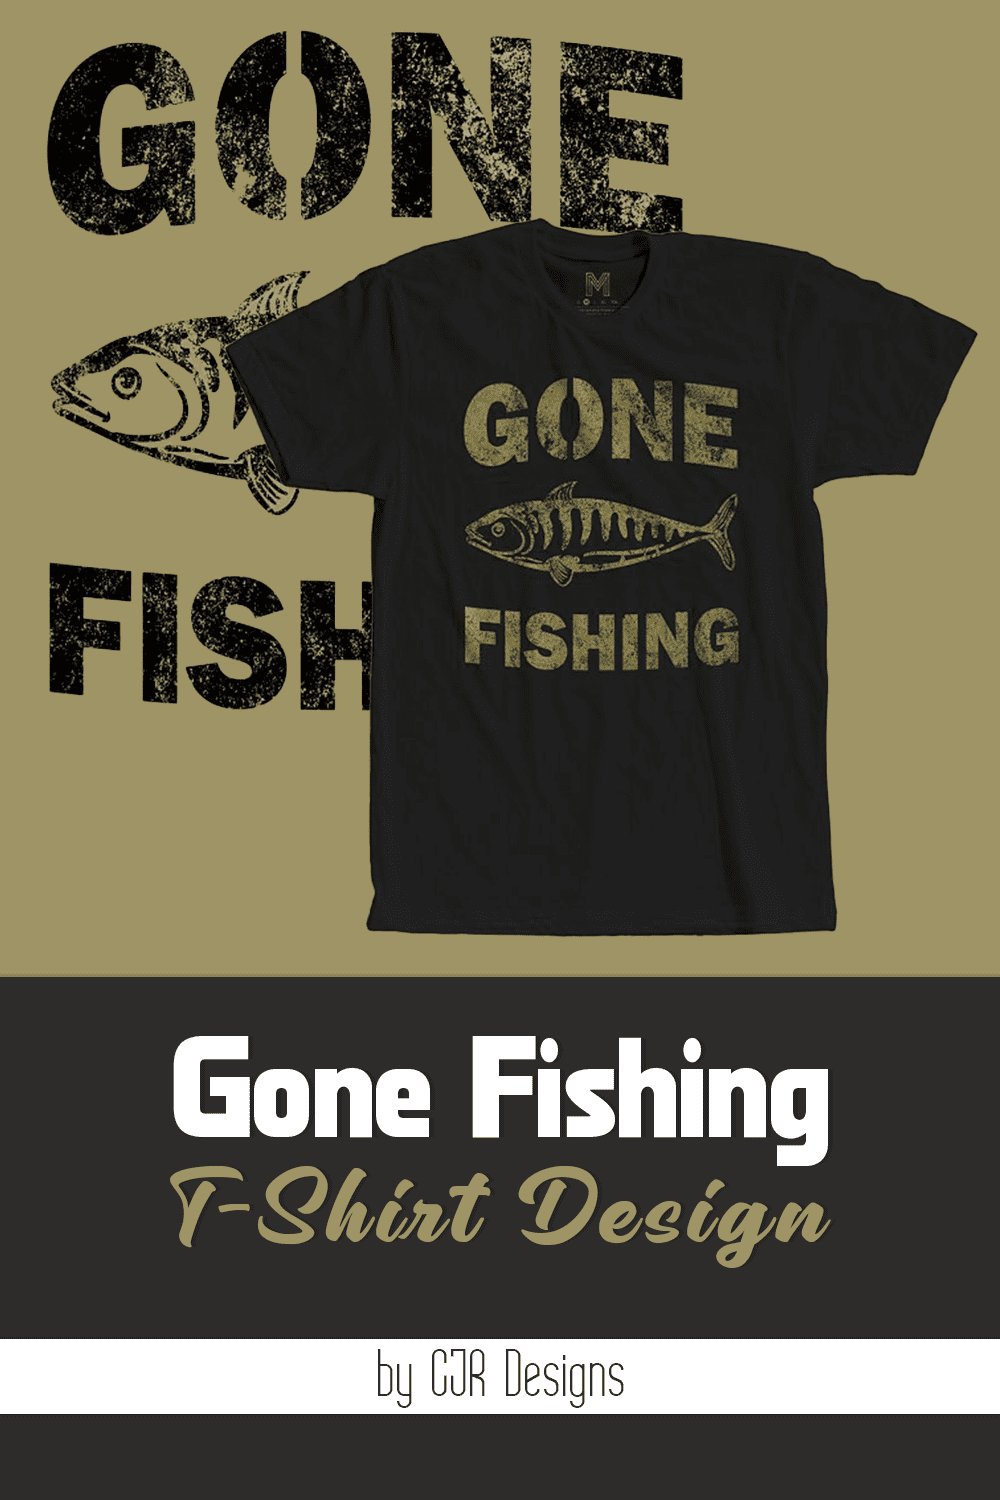 Black T-shirt with a beautiful image of a fish.